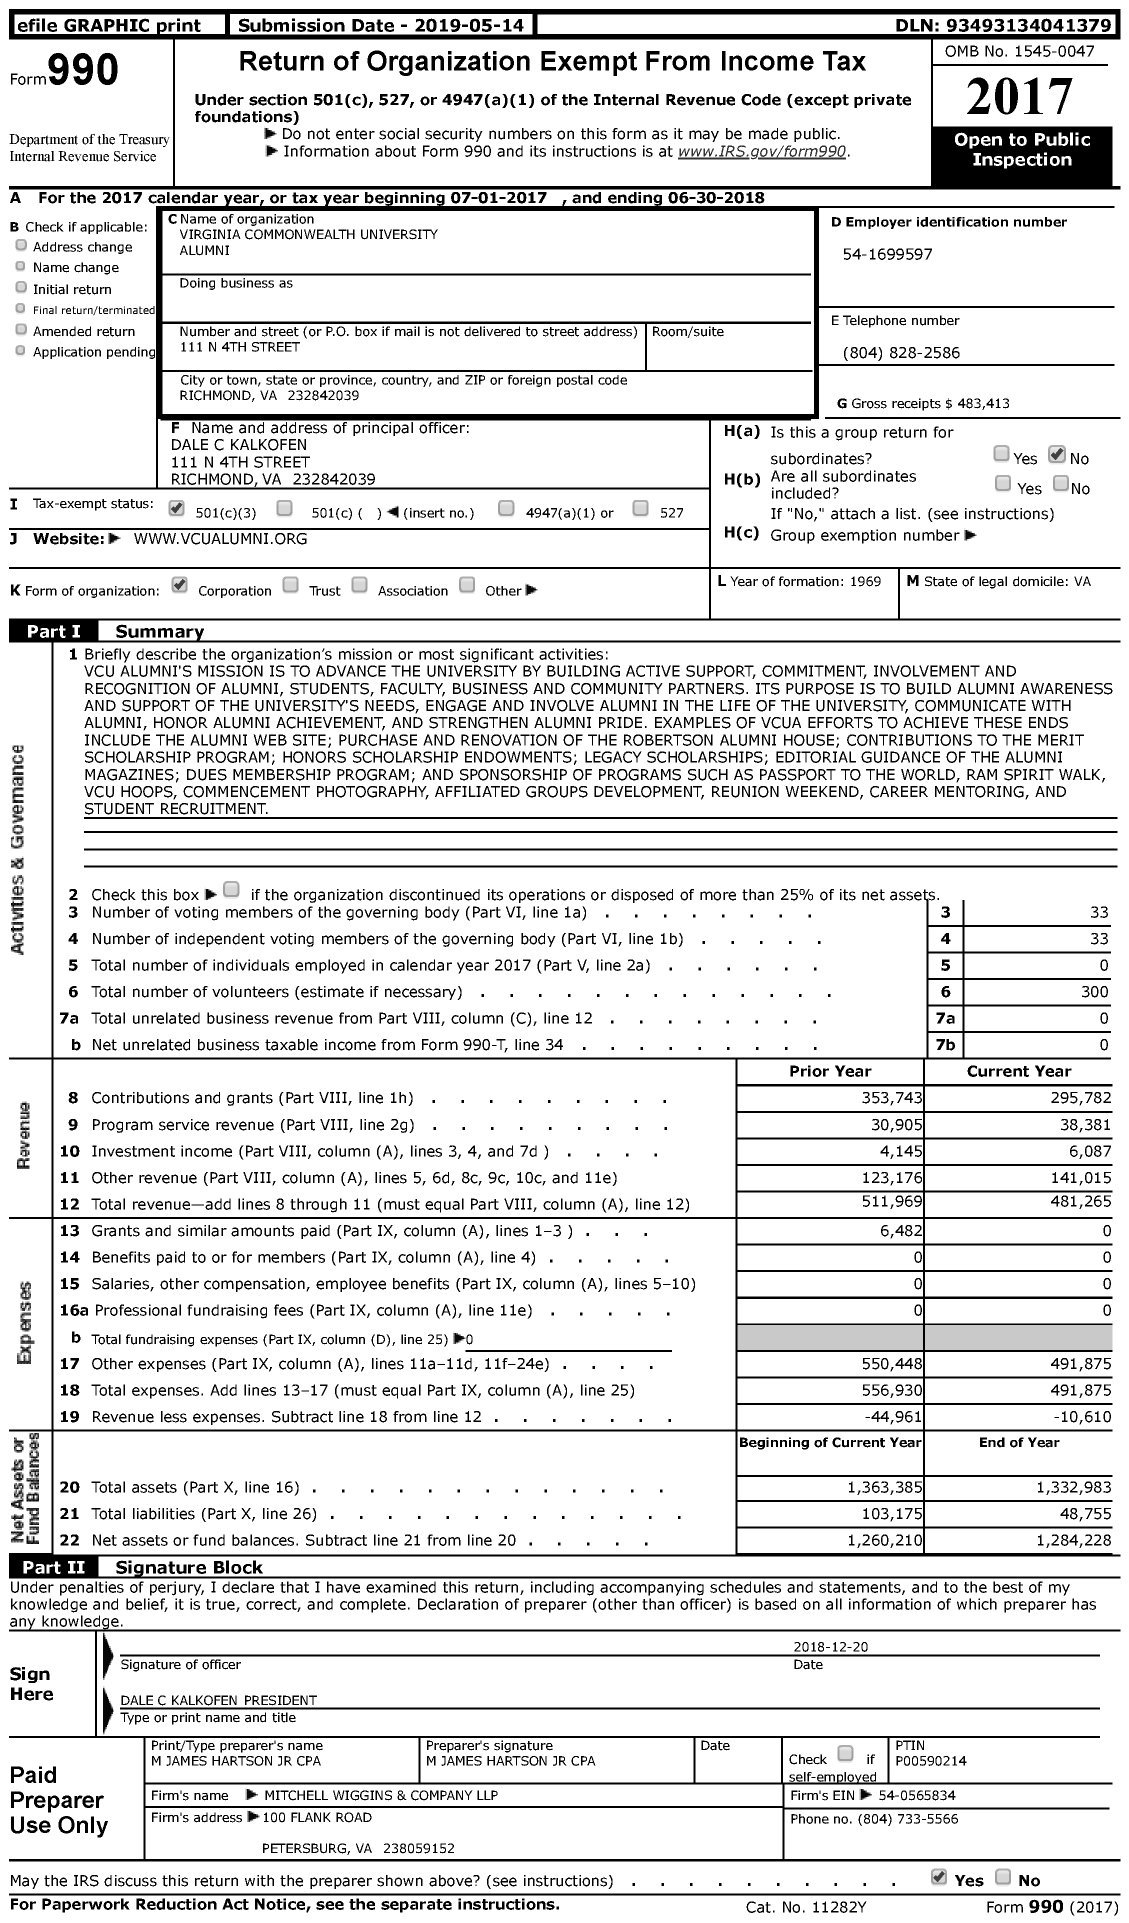 Image of first page of 2017 Form 990 for Virginia Commonwealth University